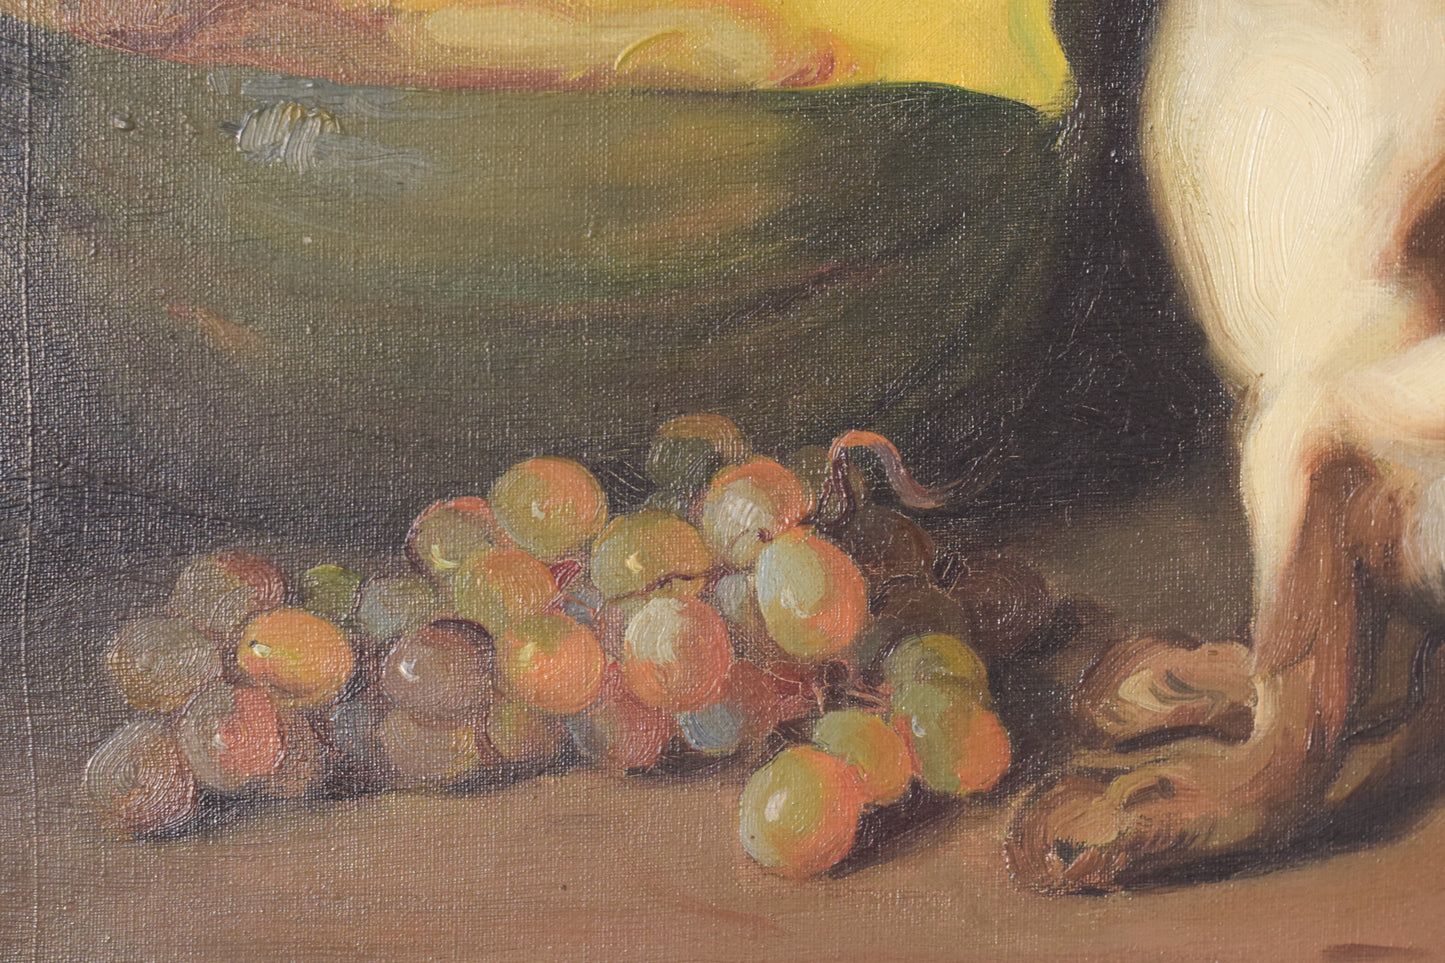 Guillermo Martinez Soliman - Still Life with Melon and Hare